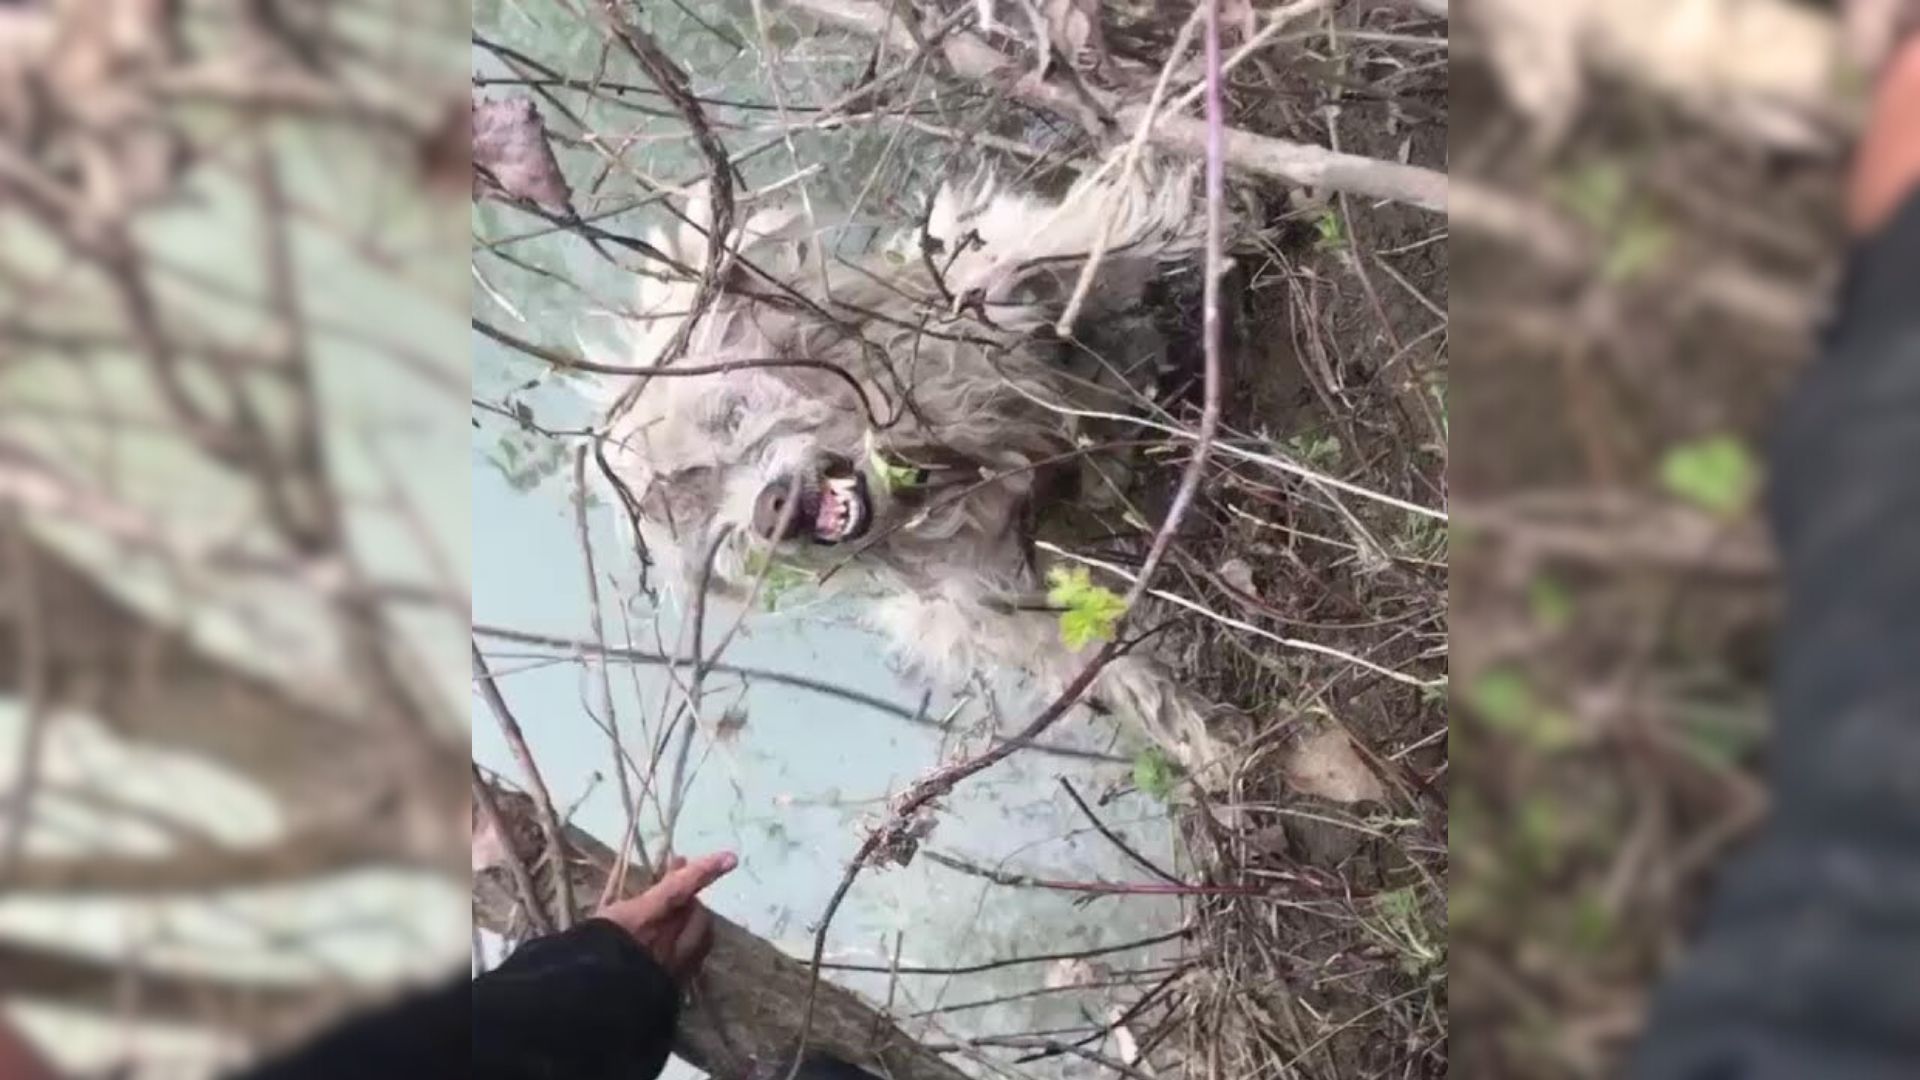 A Scared Dog Kept Running Away From His Rescuers Not Knowing They Only Wanted To Help